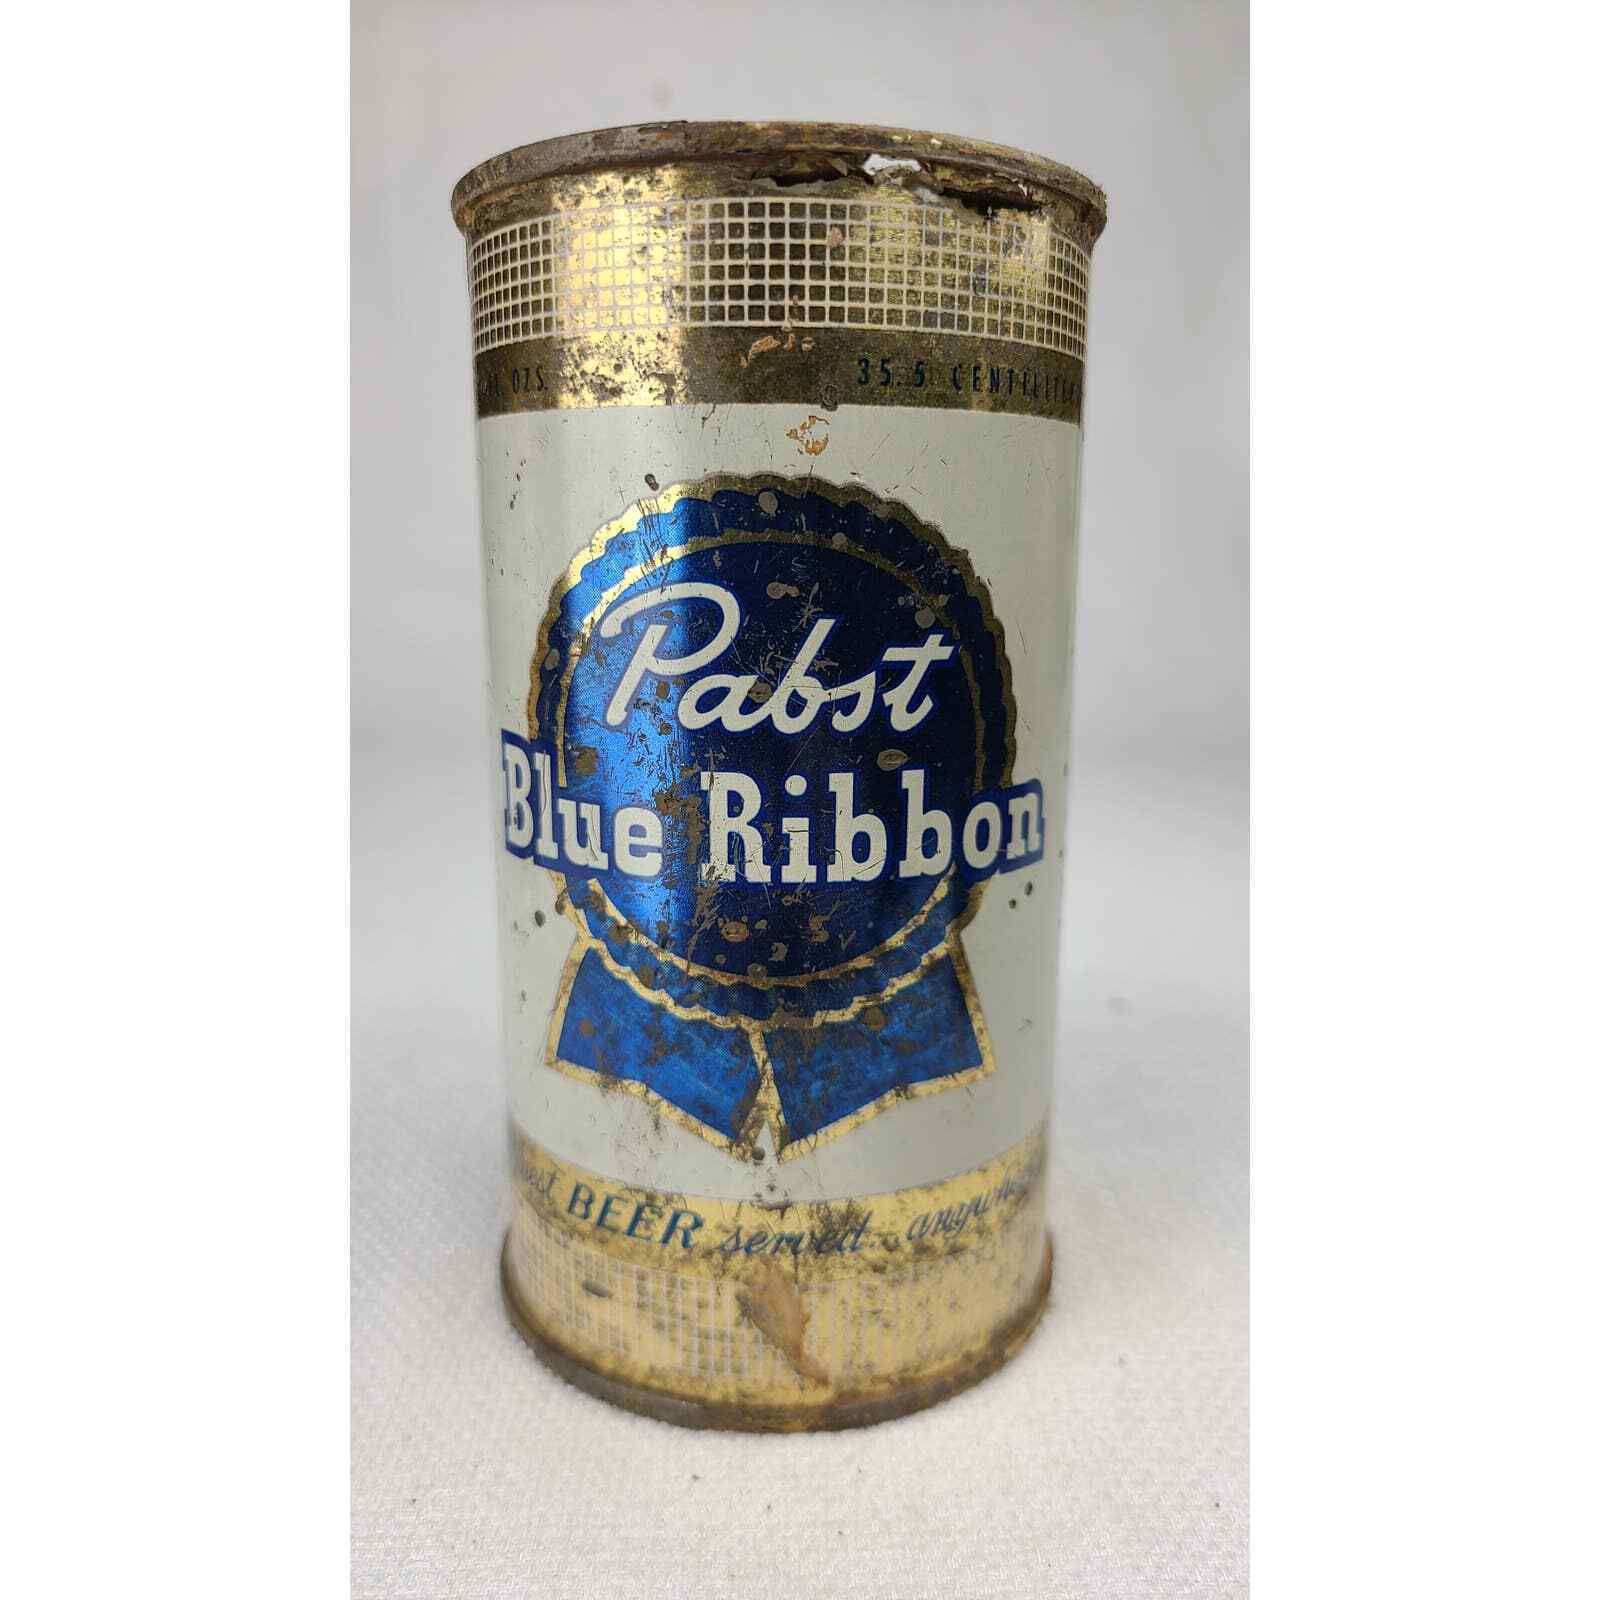 Pabst Blue Ribbon Beer Peoria Heights ILL Flat Top Beer Can EMPTY